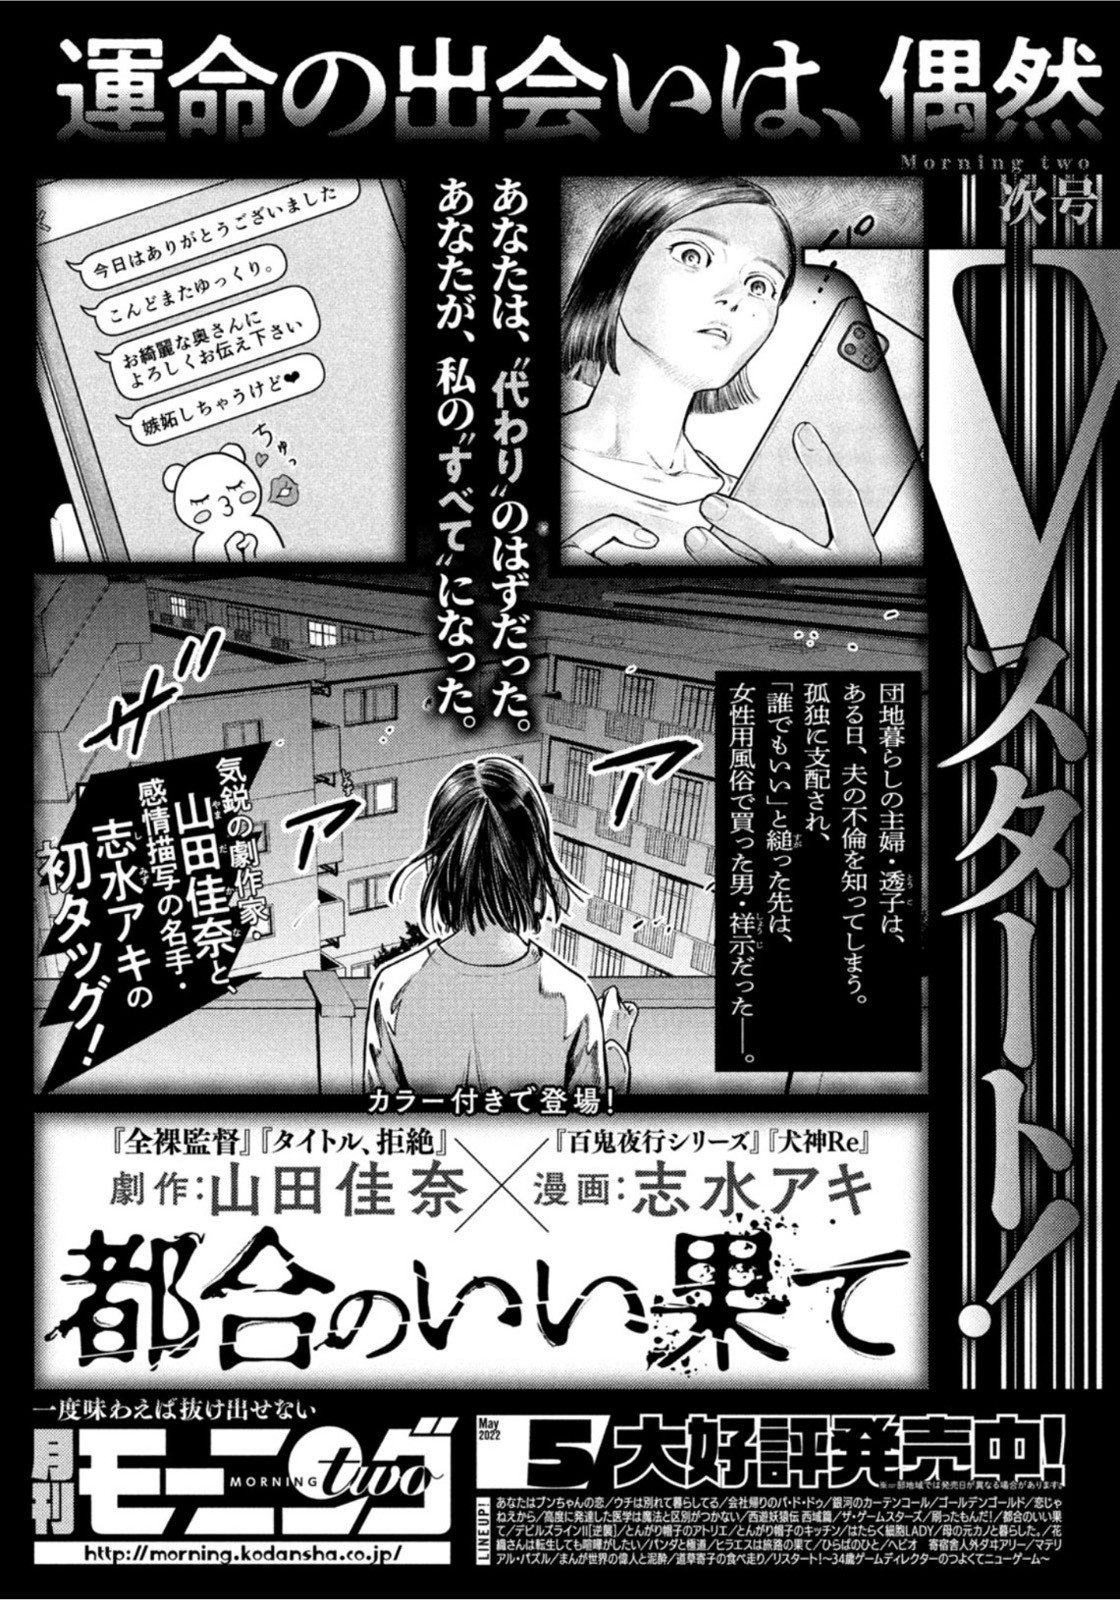 Weekly Morning - 週刊モーニング - Chapter 2022-17 - Page 421